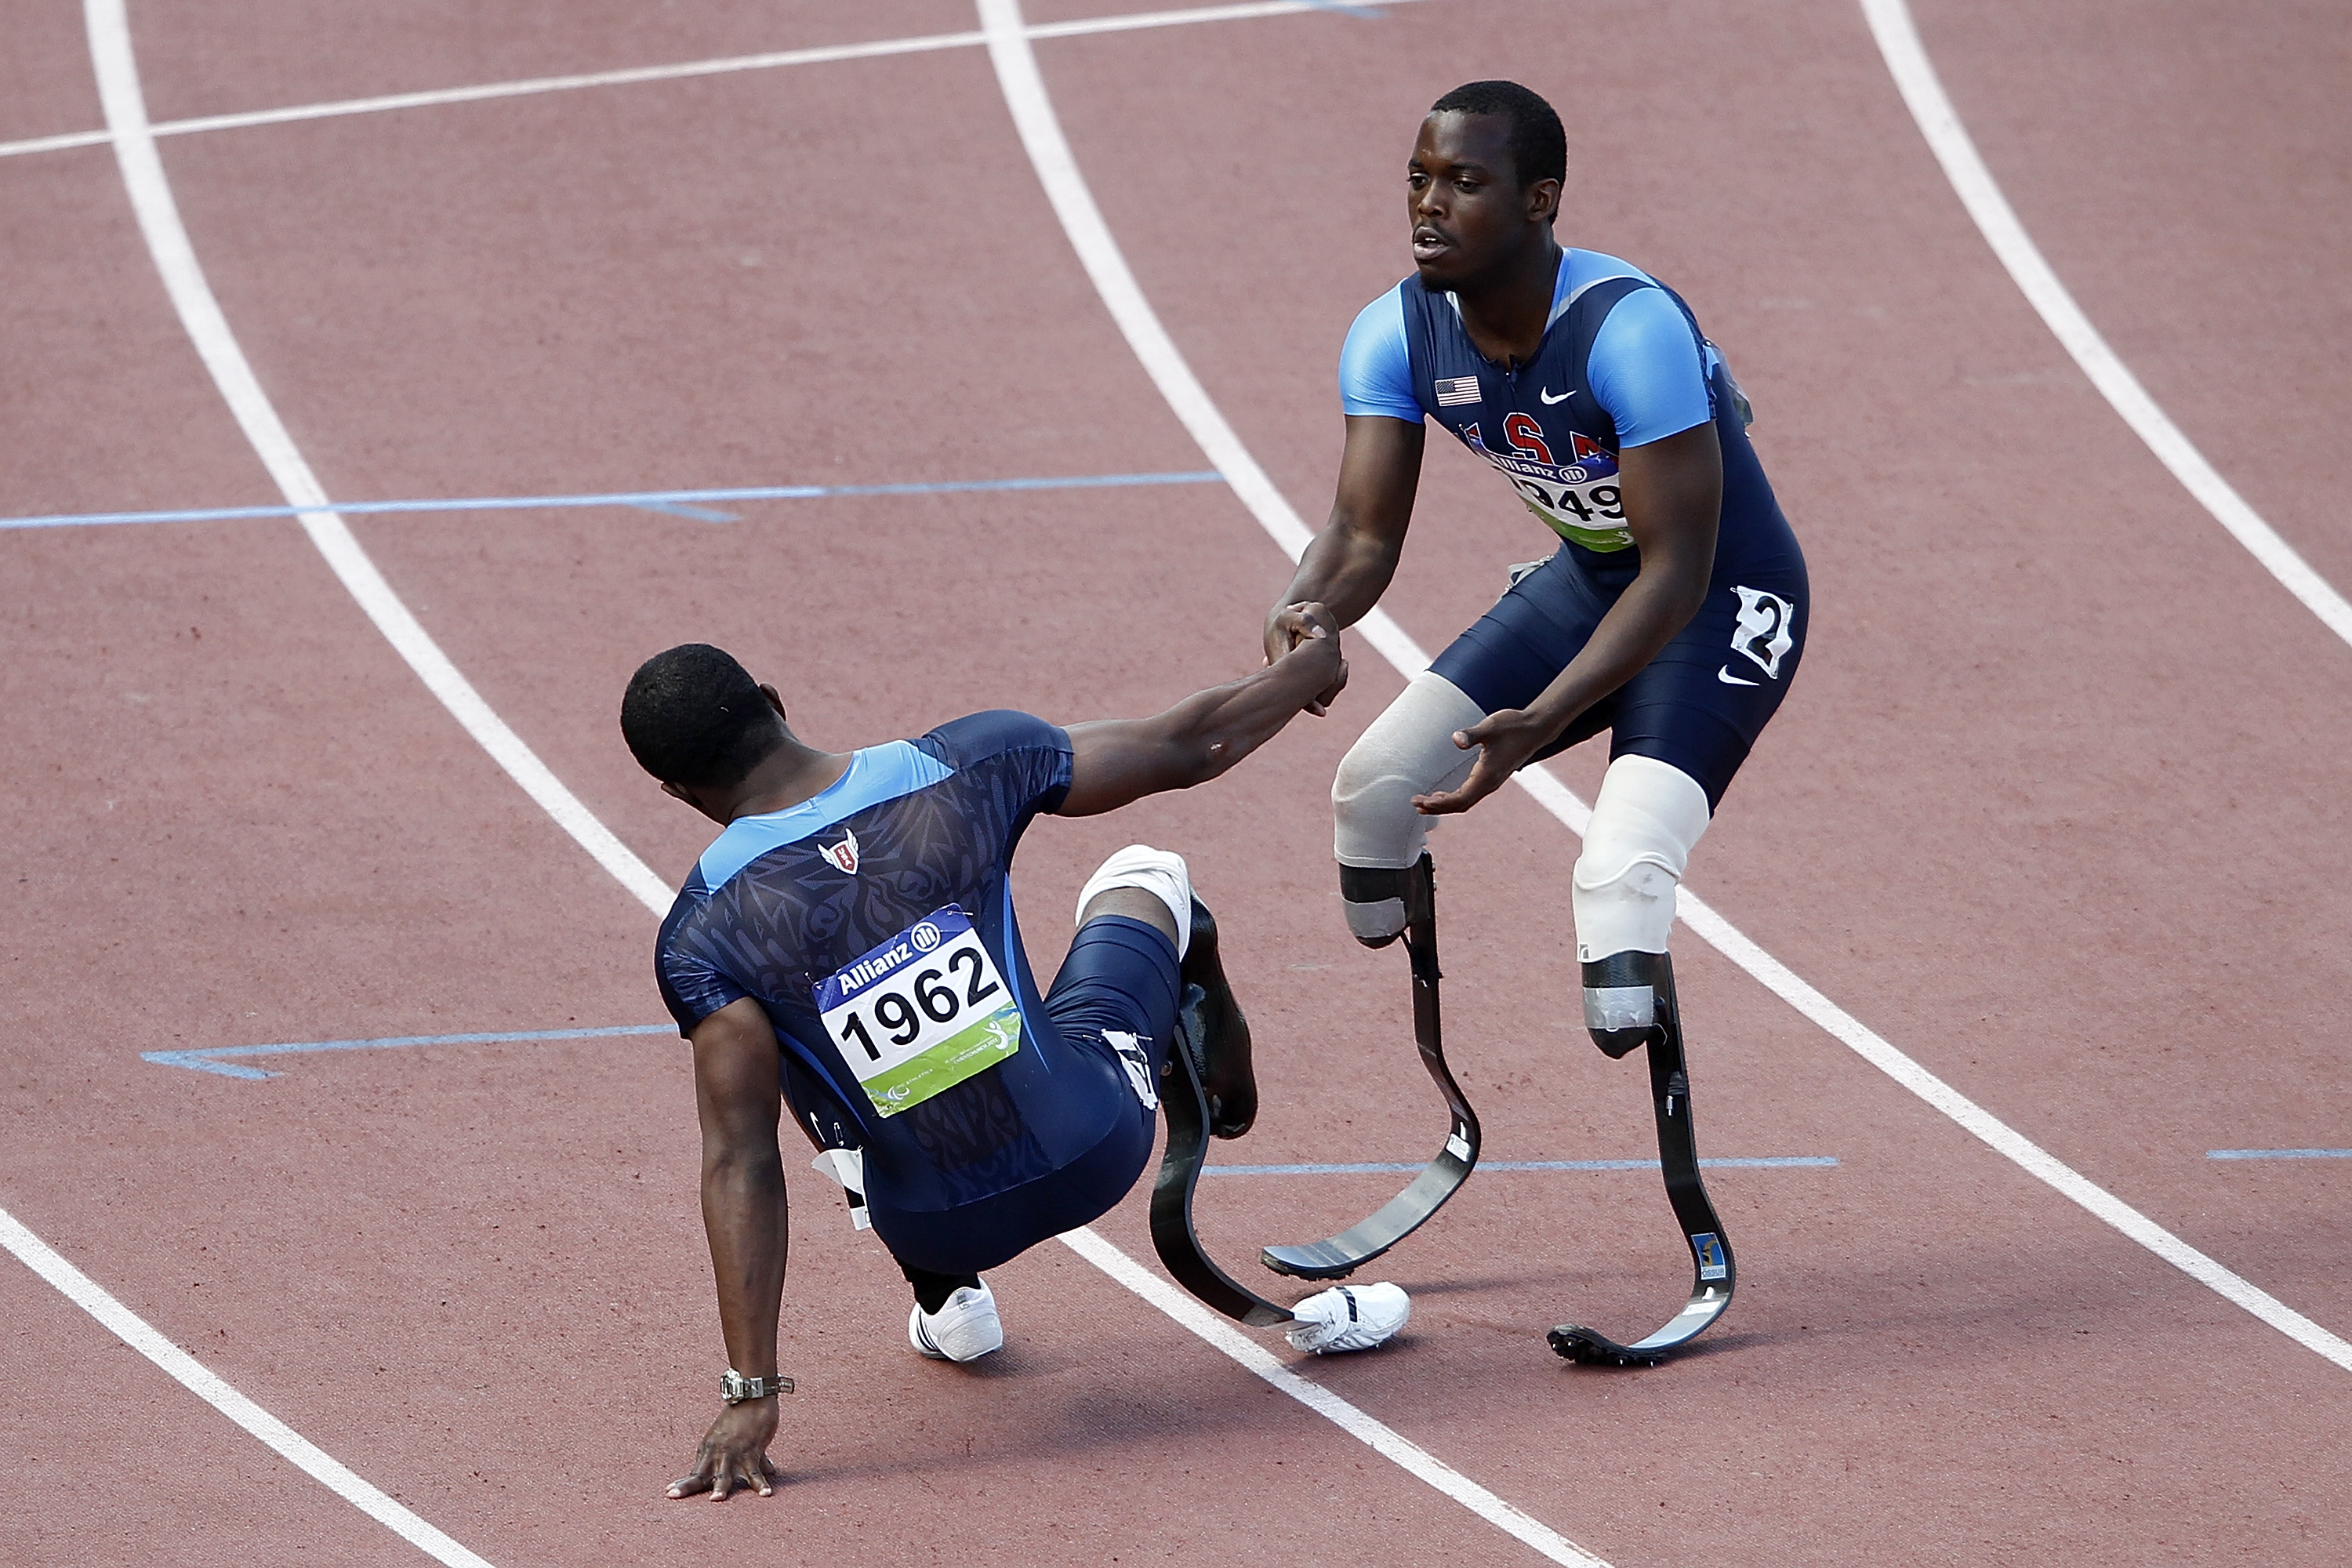 Rookies Shine on Day 2 of 2012 U.S. Paralympic Track & Field Trials